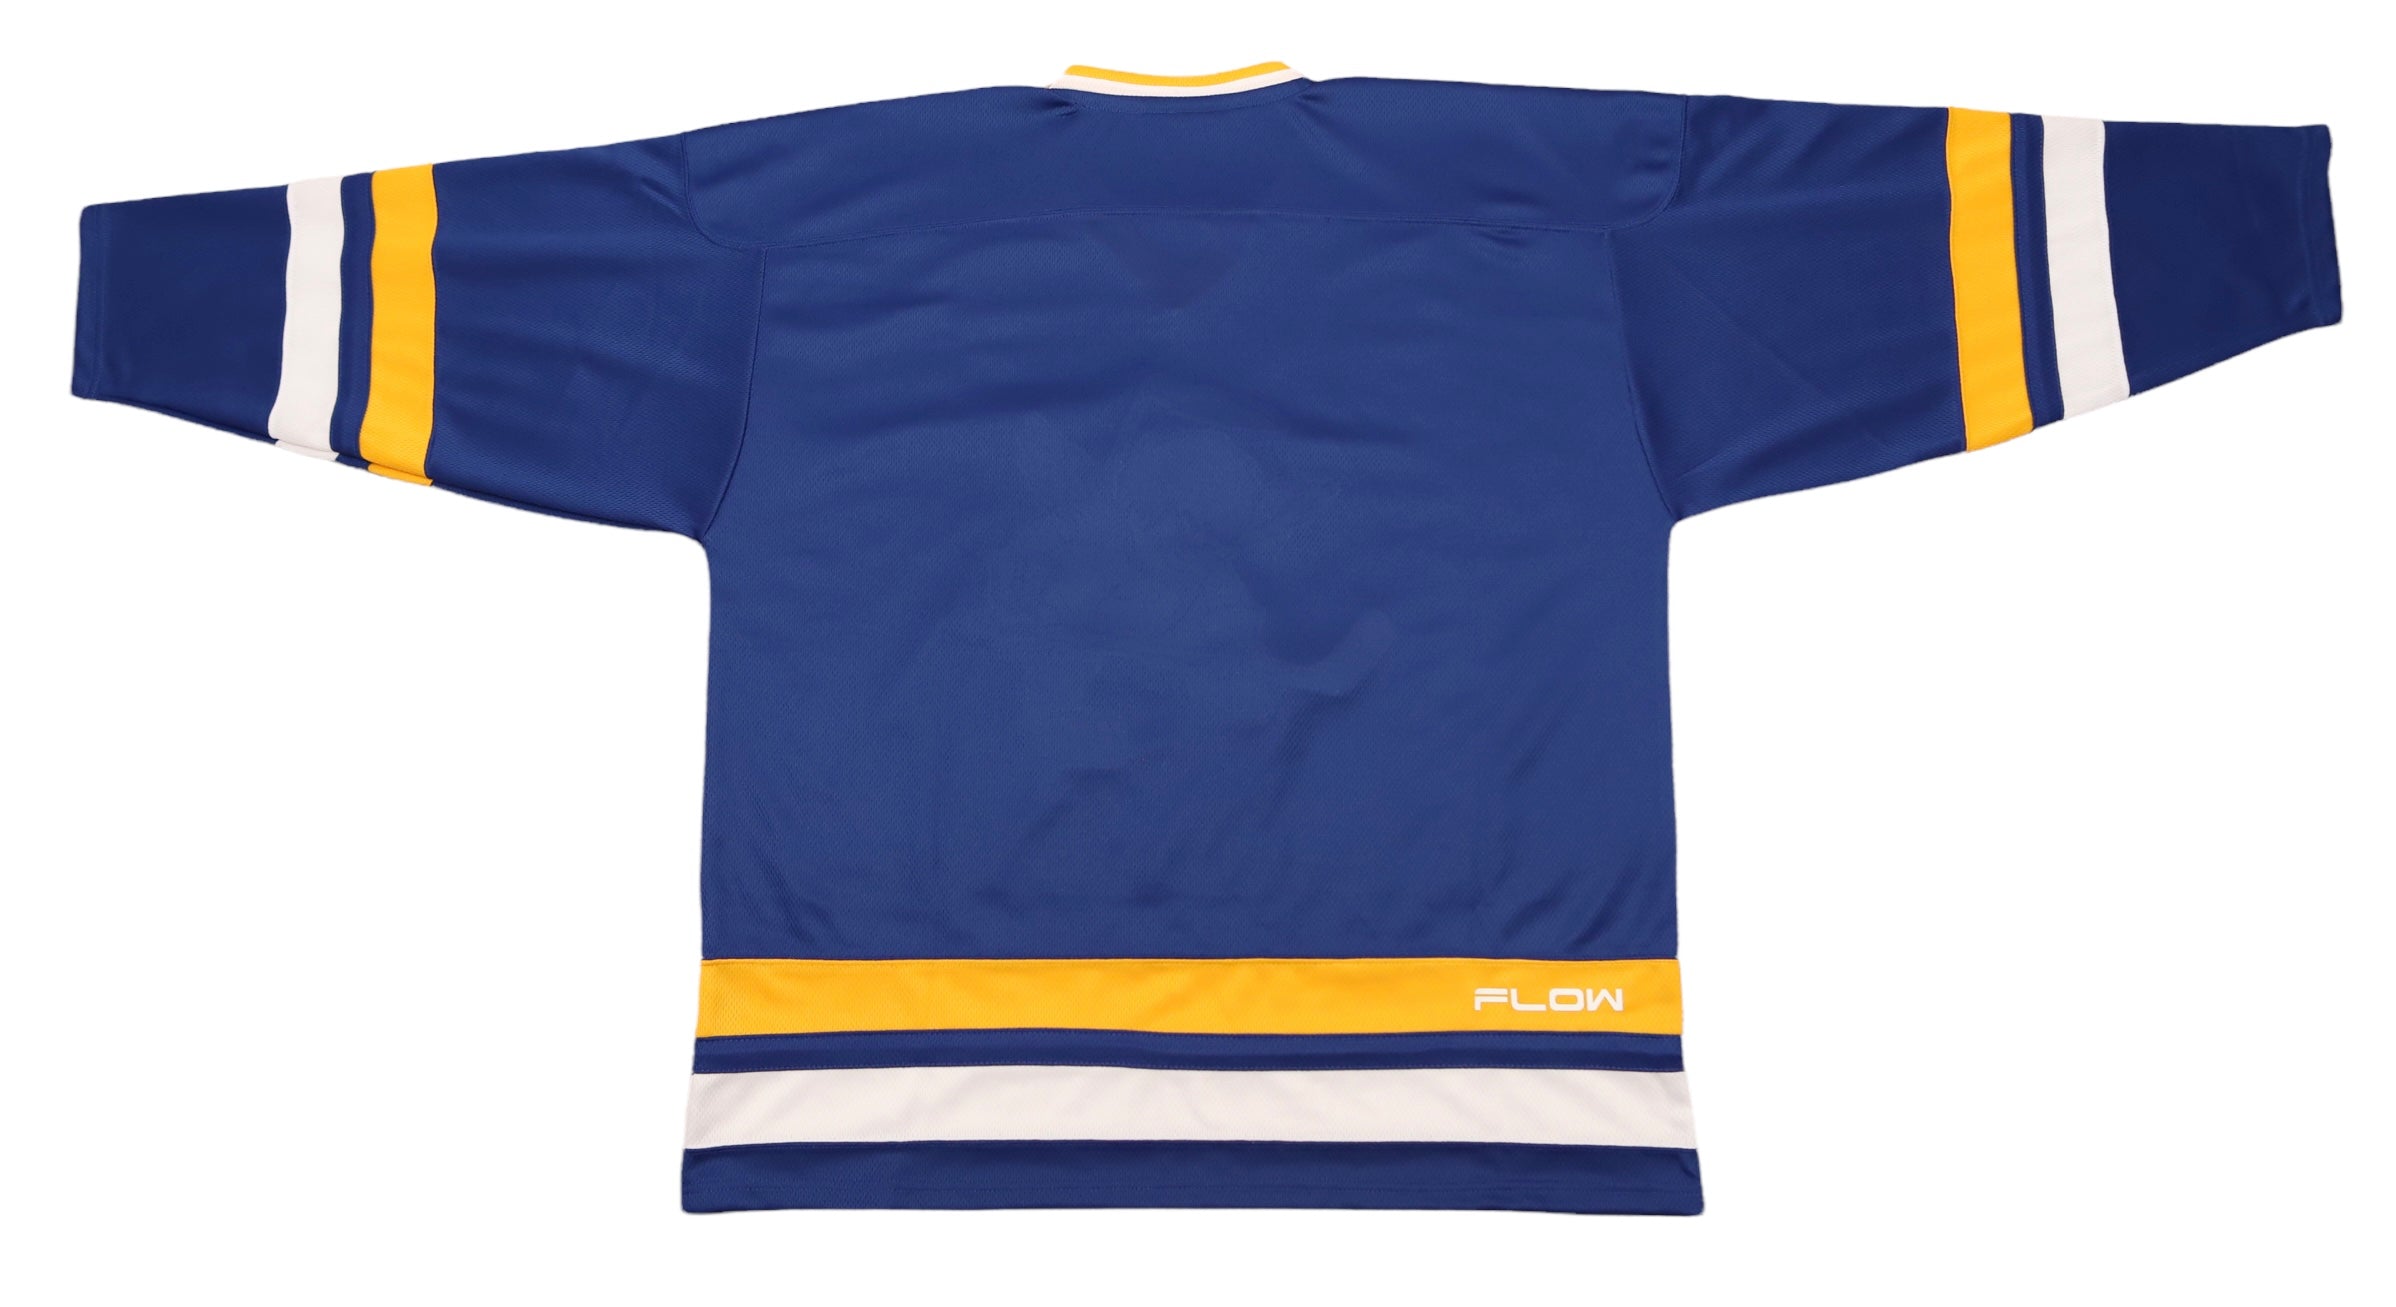 Custom Hockey Jerseys with The Saints Team Logo Youth Large / (name and Number on Back and Sleeves) / Blue